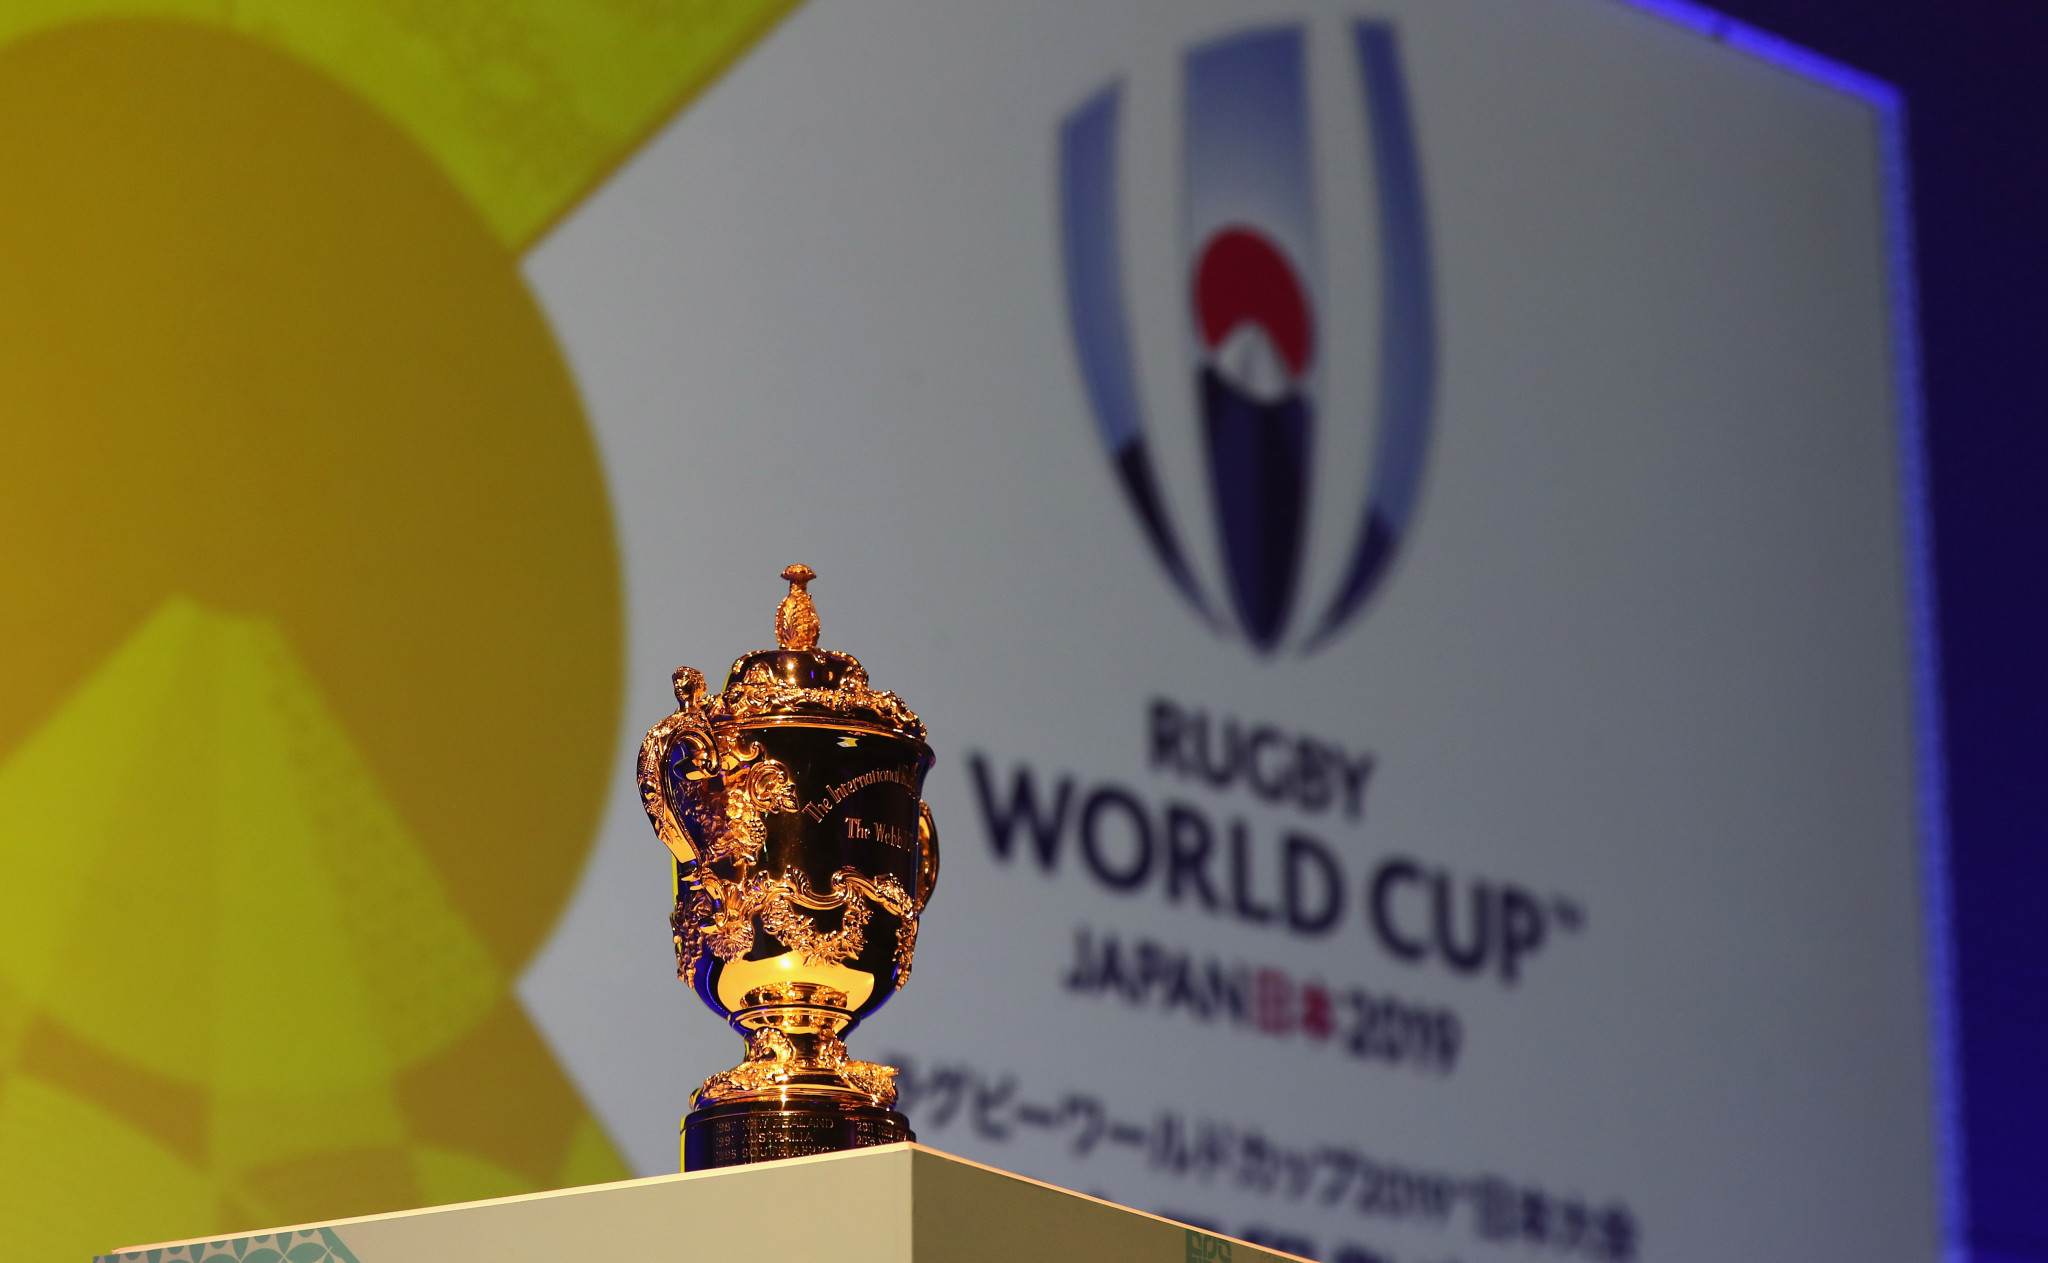 Organisers claim Rugby World Cup 2019 in Japan will be "game-changing"